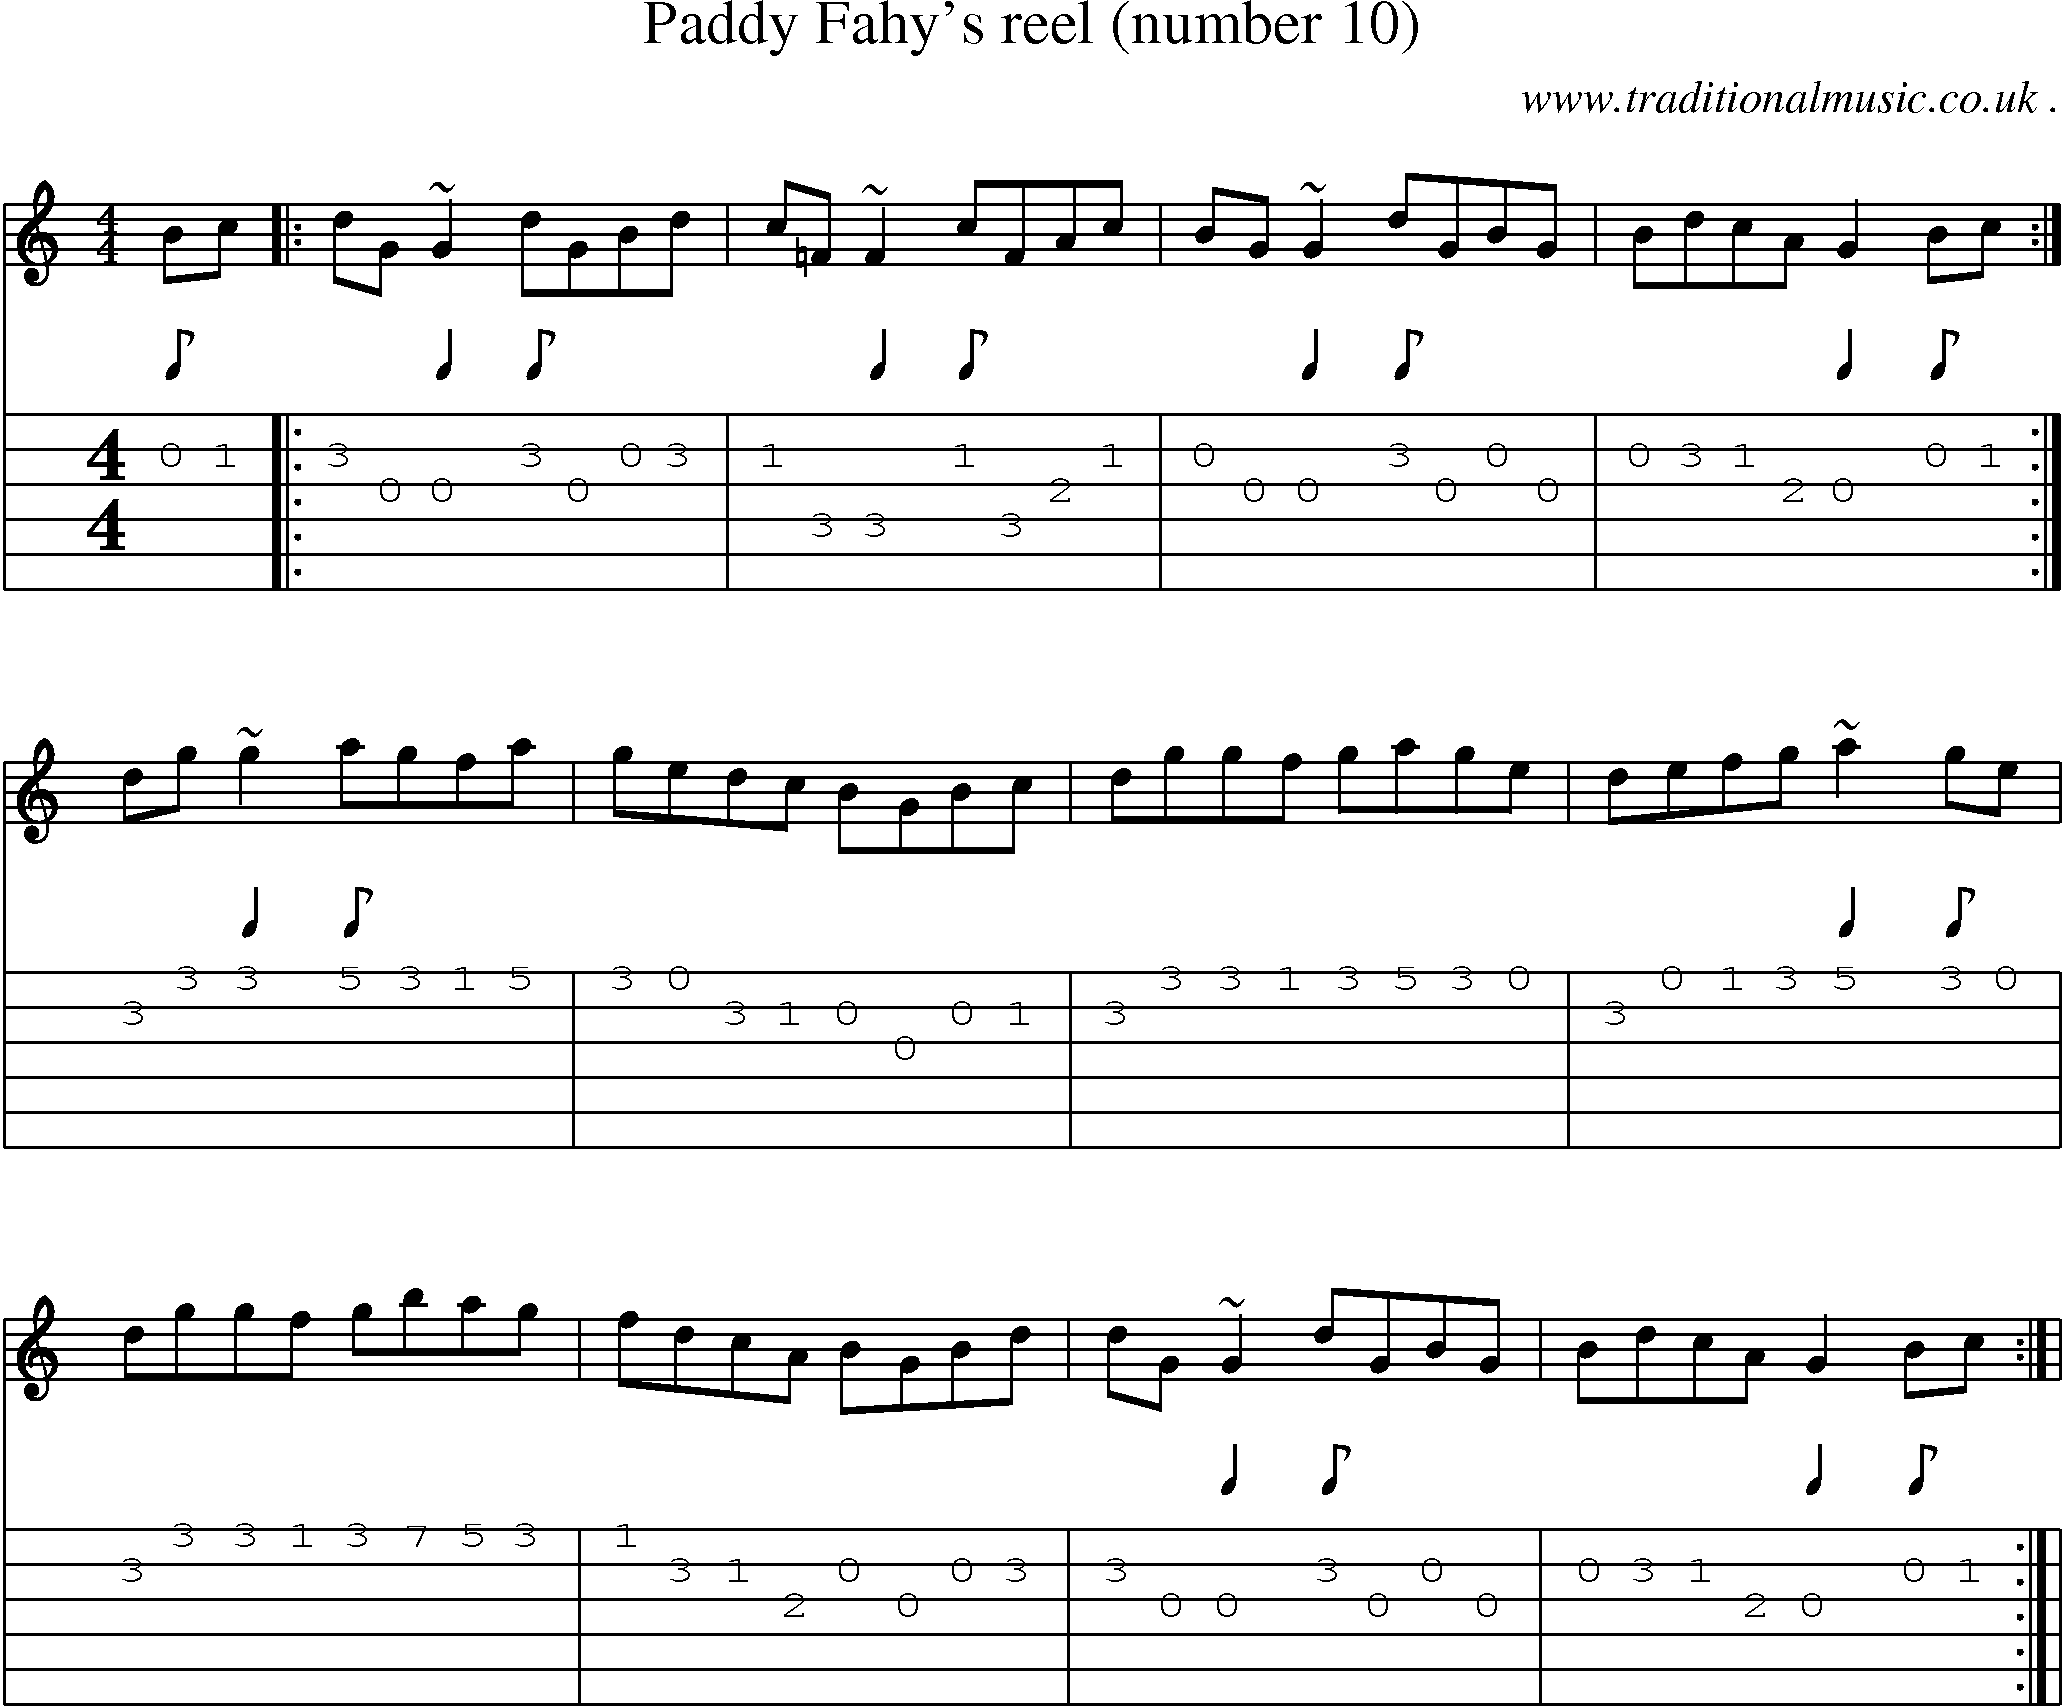 Sheet-music  score, Chords and Guitar Tabs for Paddy Fahys Reel Number 10